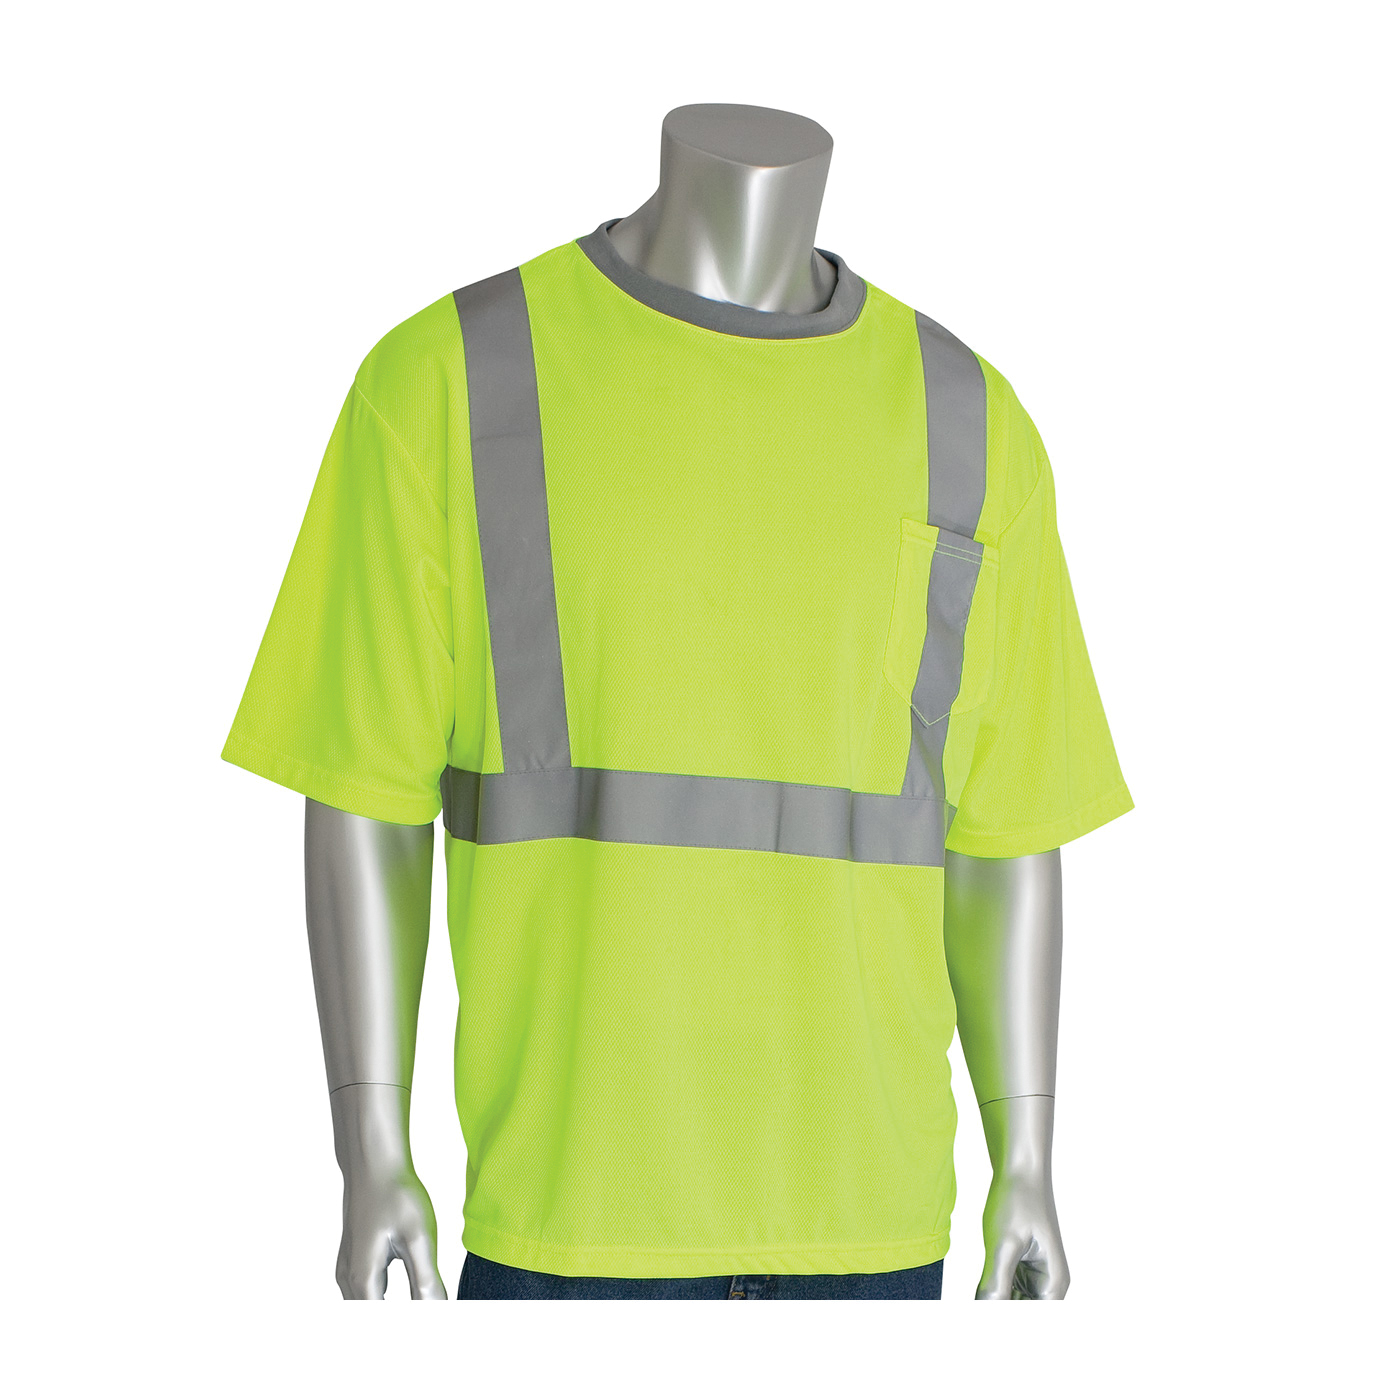 PIP® 312-1200-LY/4X Short Sleeve Crew Neck T-Shirt With Reflective, 4XL, Hi-Viz Lime Yellow, Bird's Eye Polyester, 34.3 in L